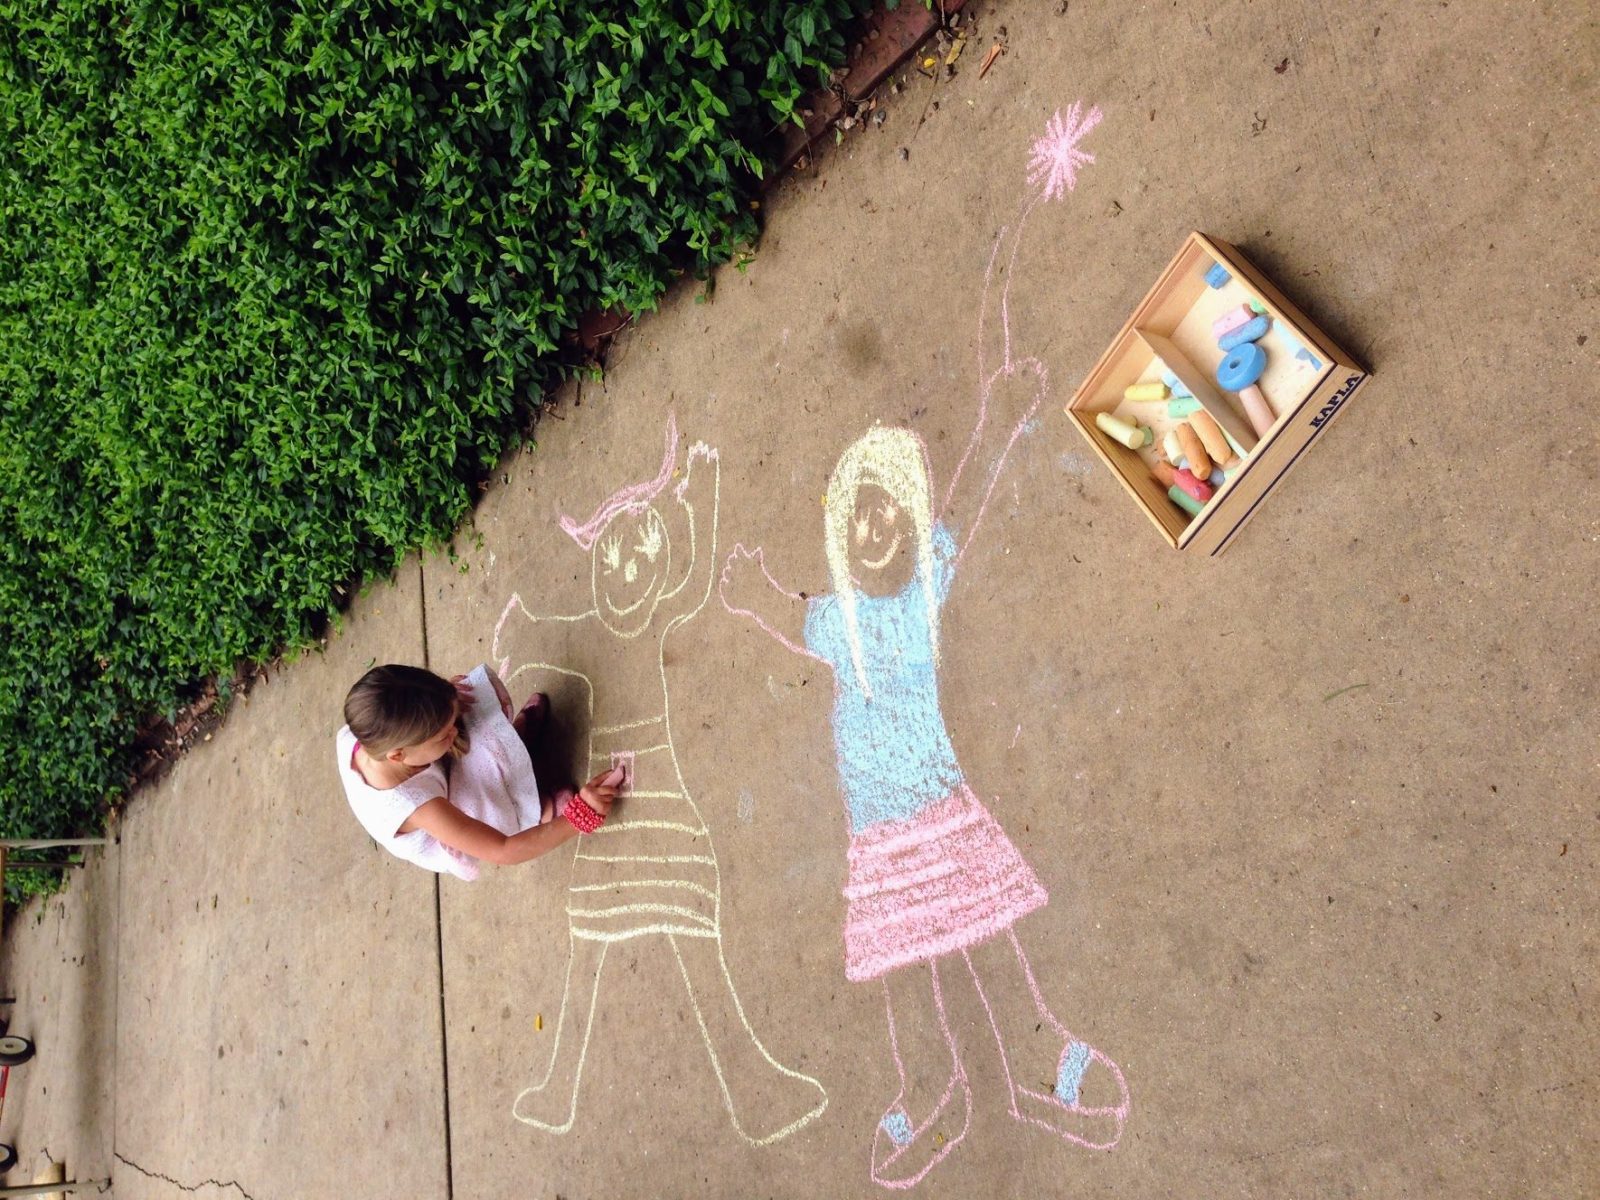 How to Make Your Own Sidewalk Chalk and Create an Obstacle Course - The Art  of Education University